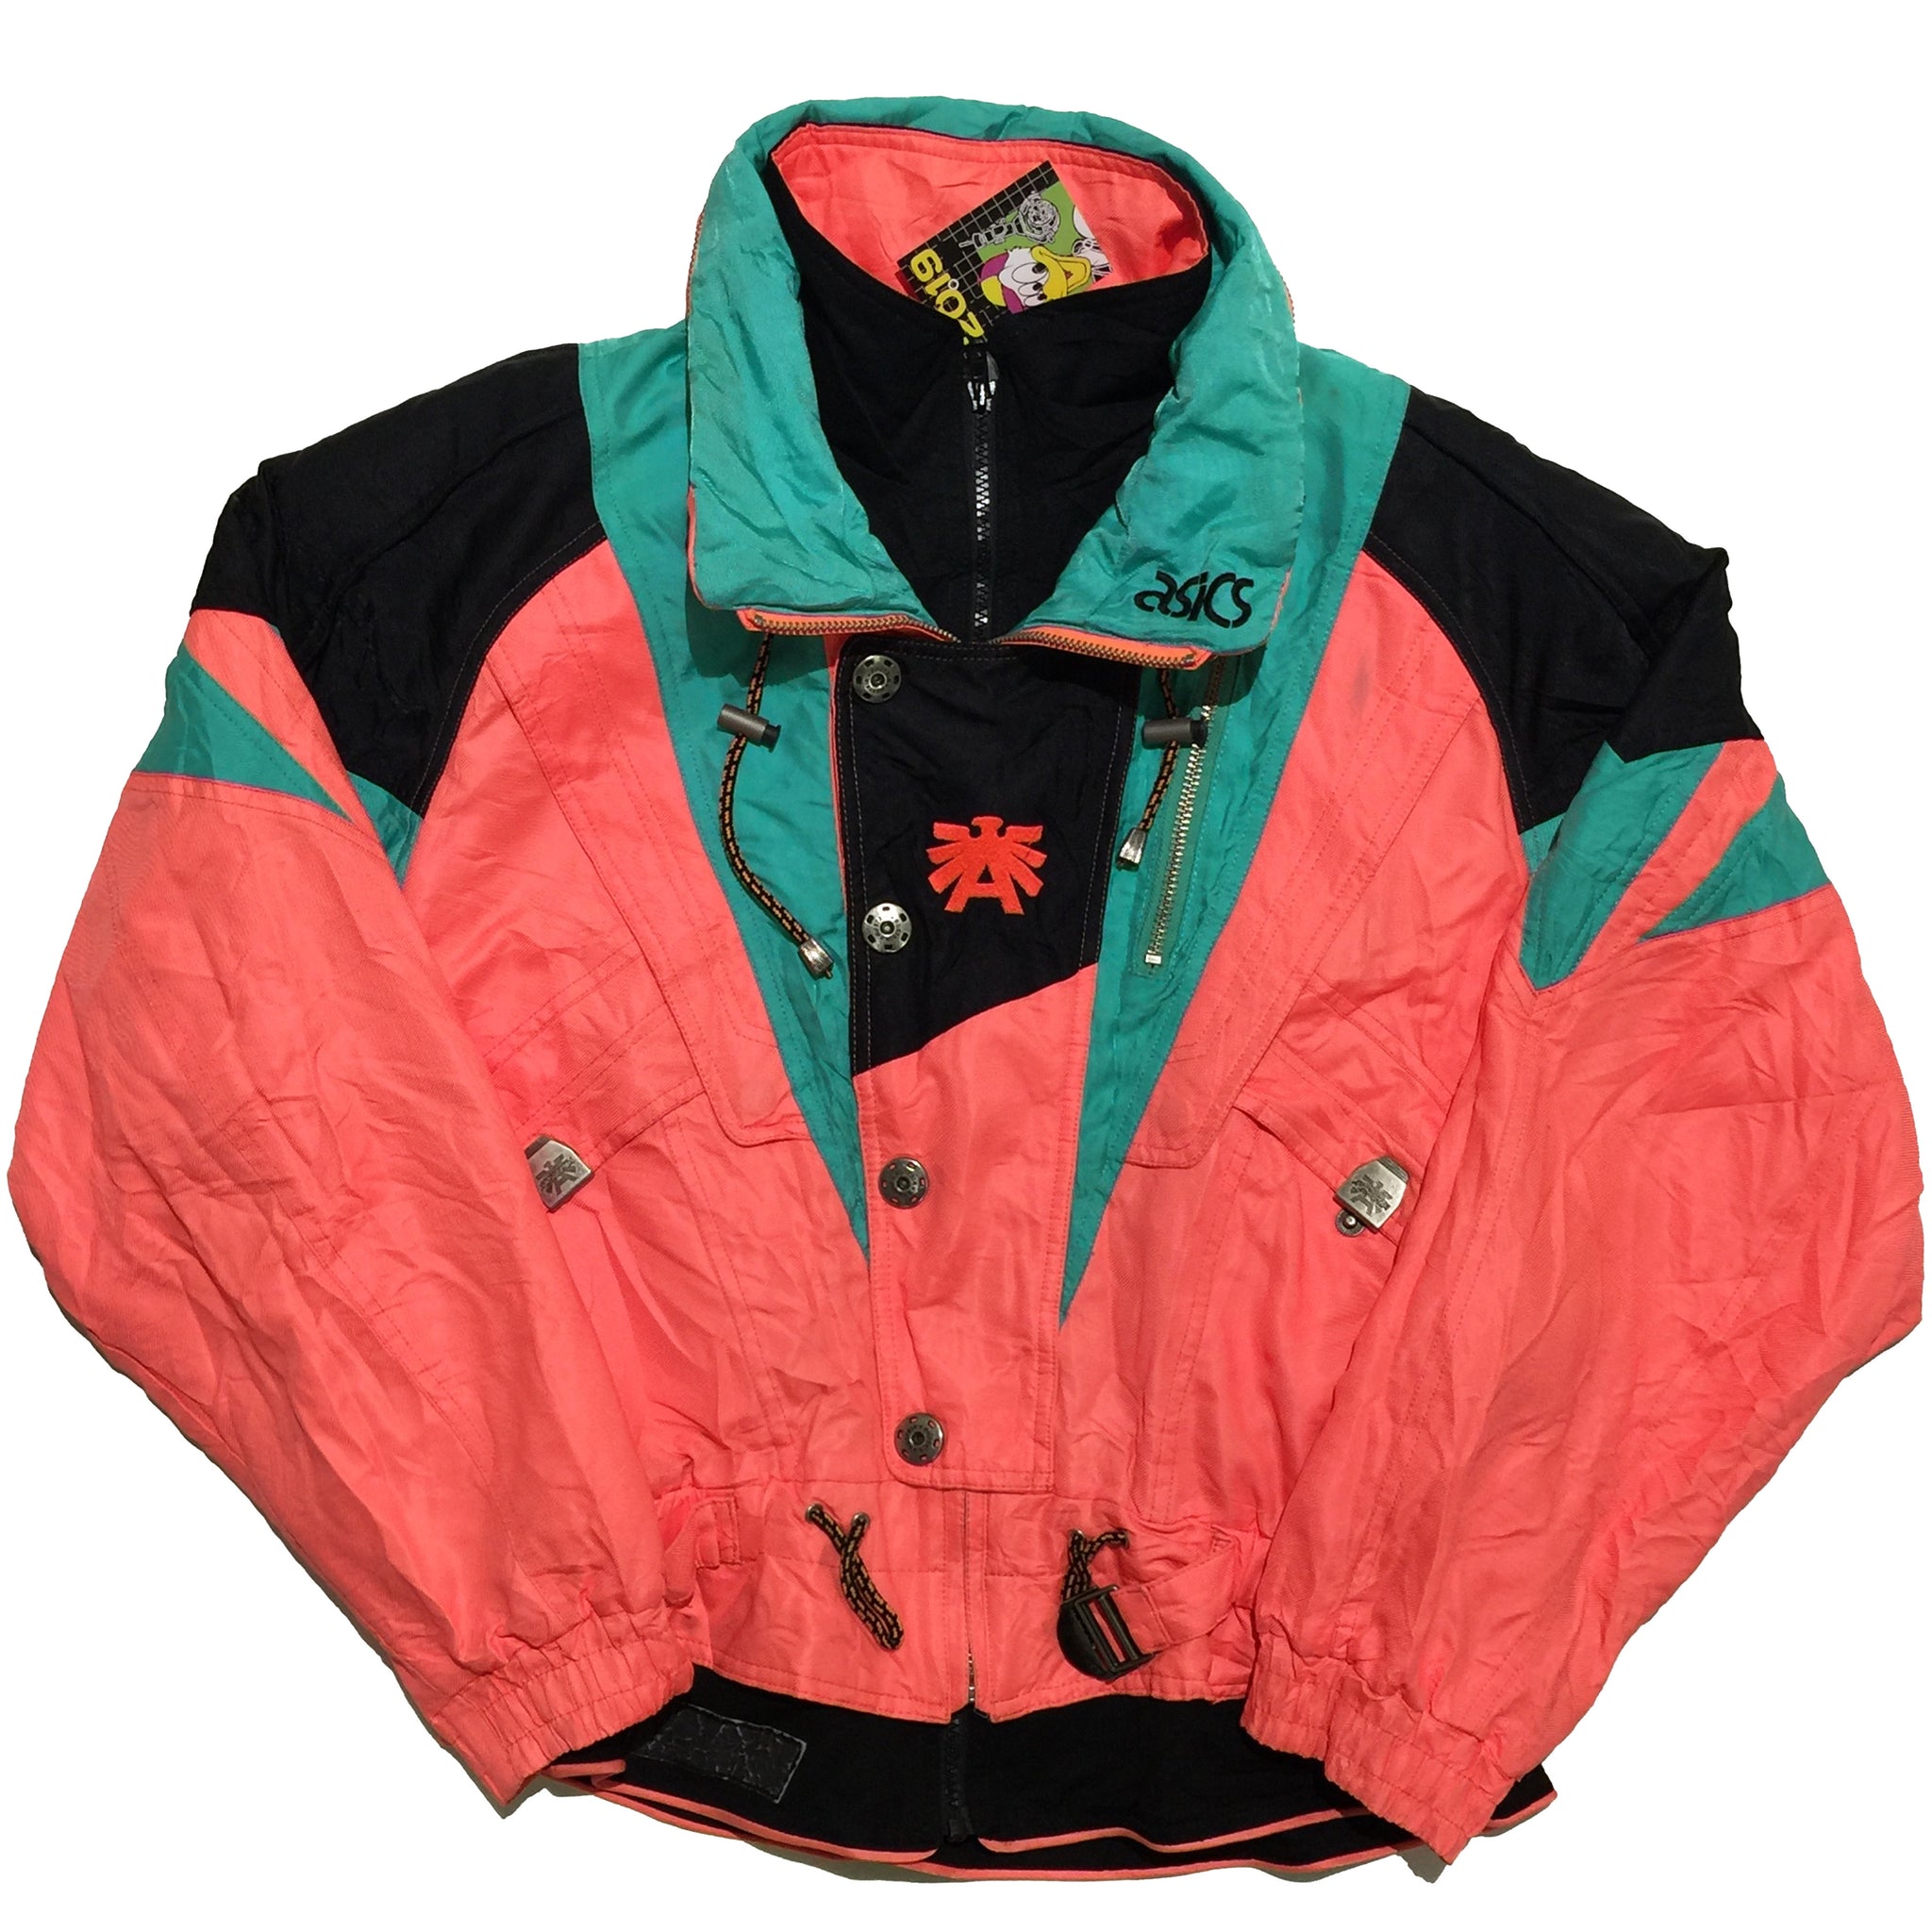 Asics Pink and Teal Jacket